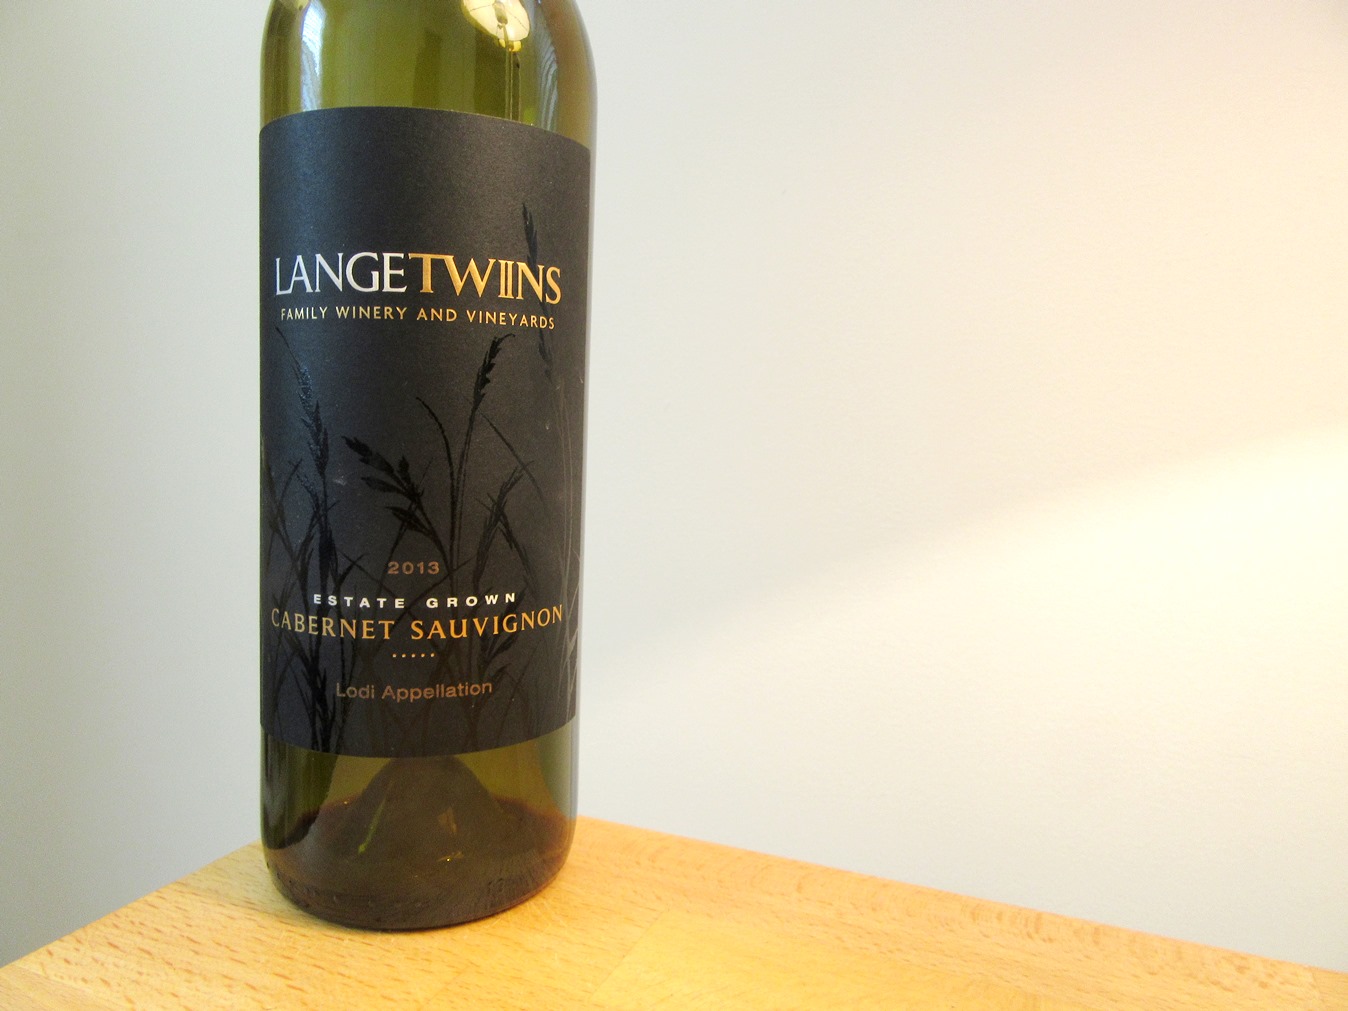 LangeTwins Family Winery and Vineyards, Cabernet Sauvignon 2013, Lodi, California, Wine Casual